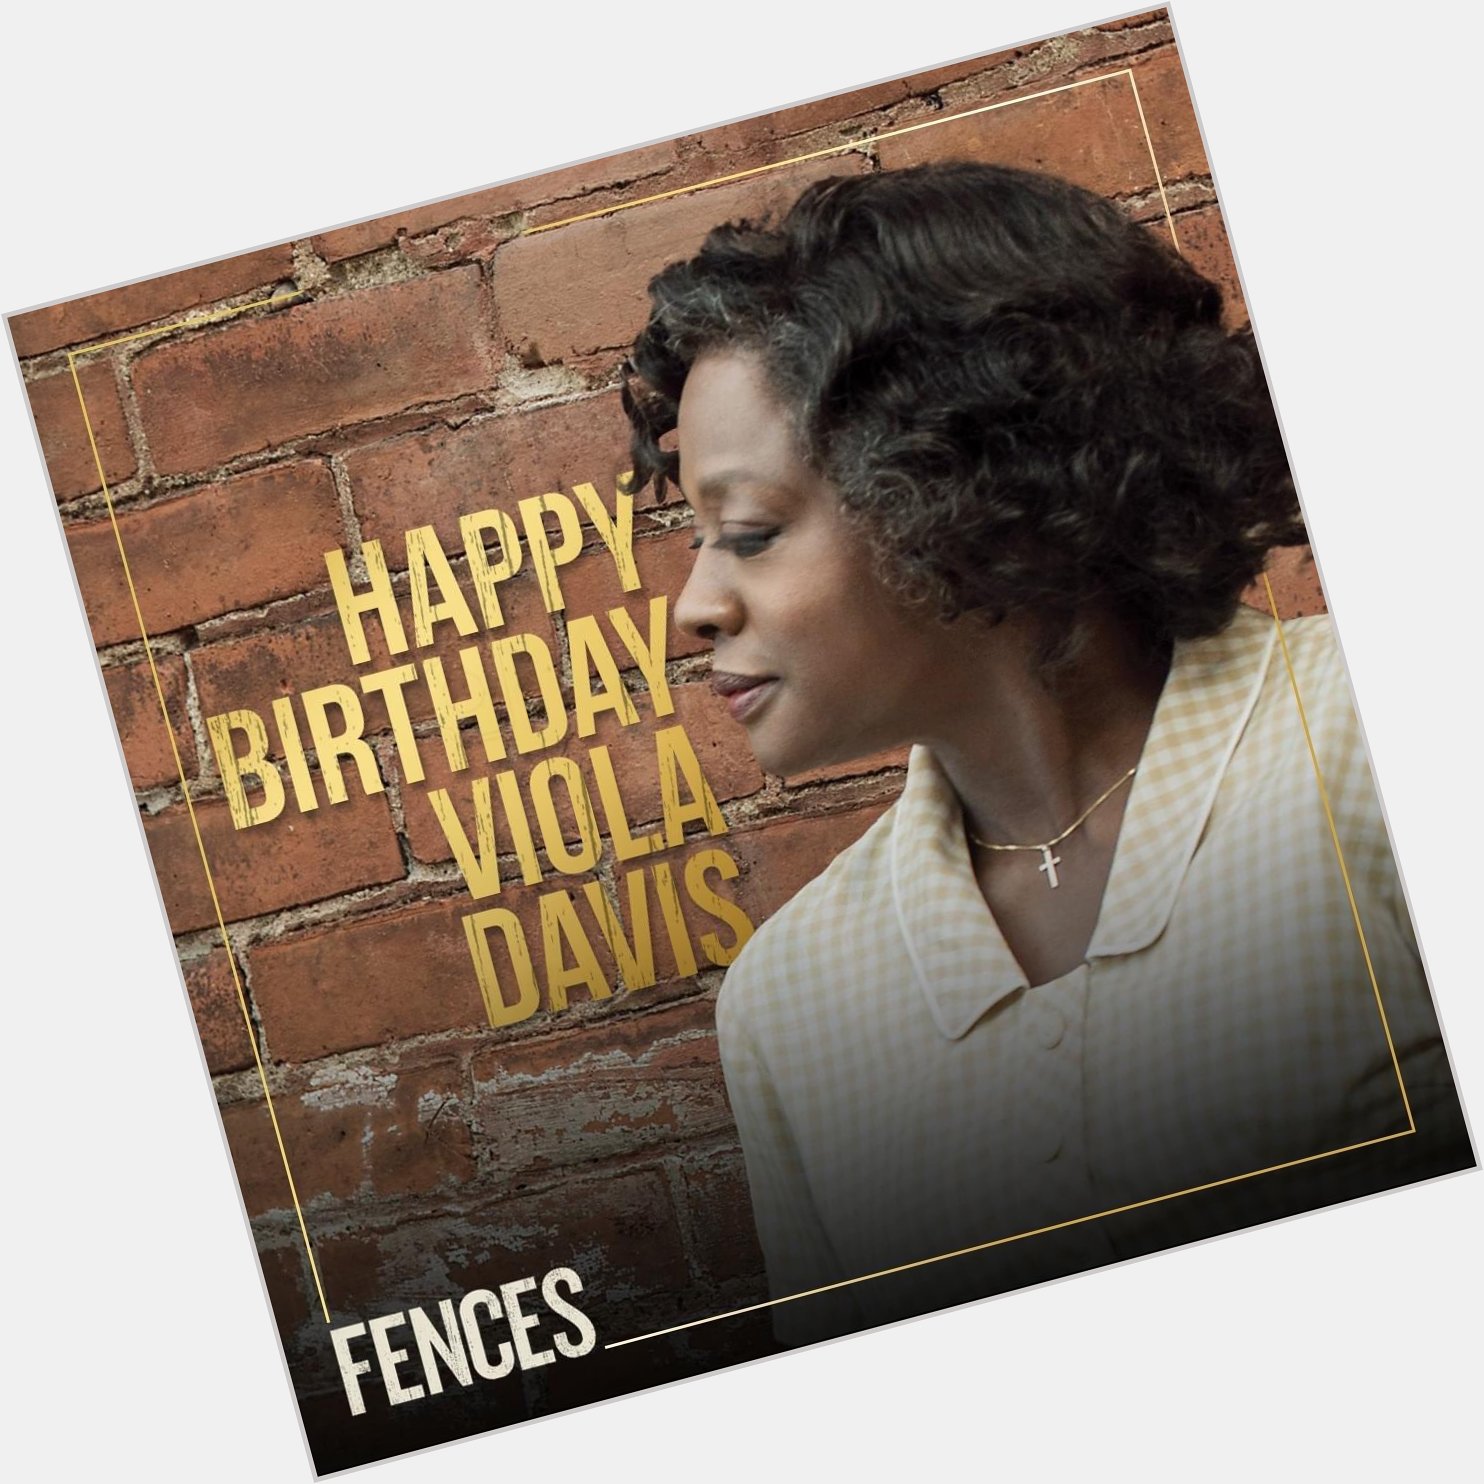 Wishing a Happy Birthday to the incredibly talented Viola Davis. 